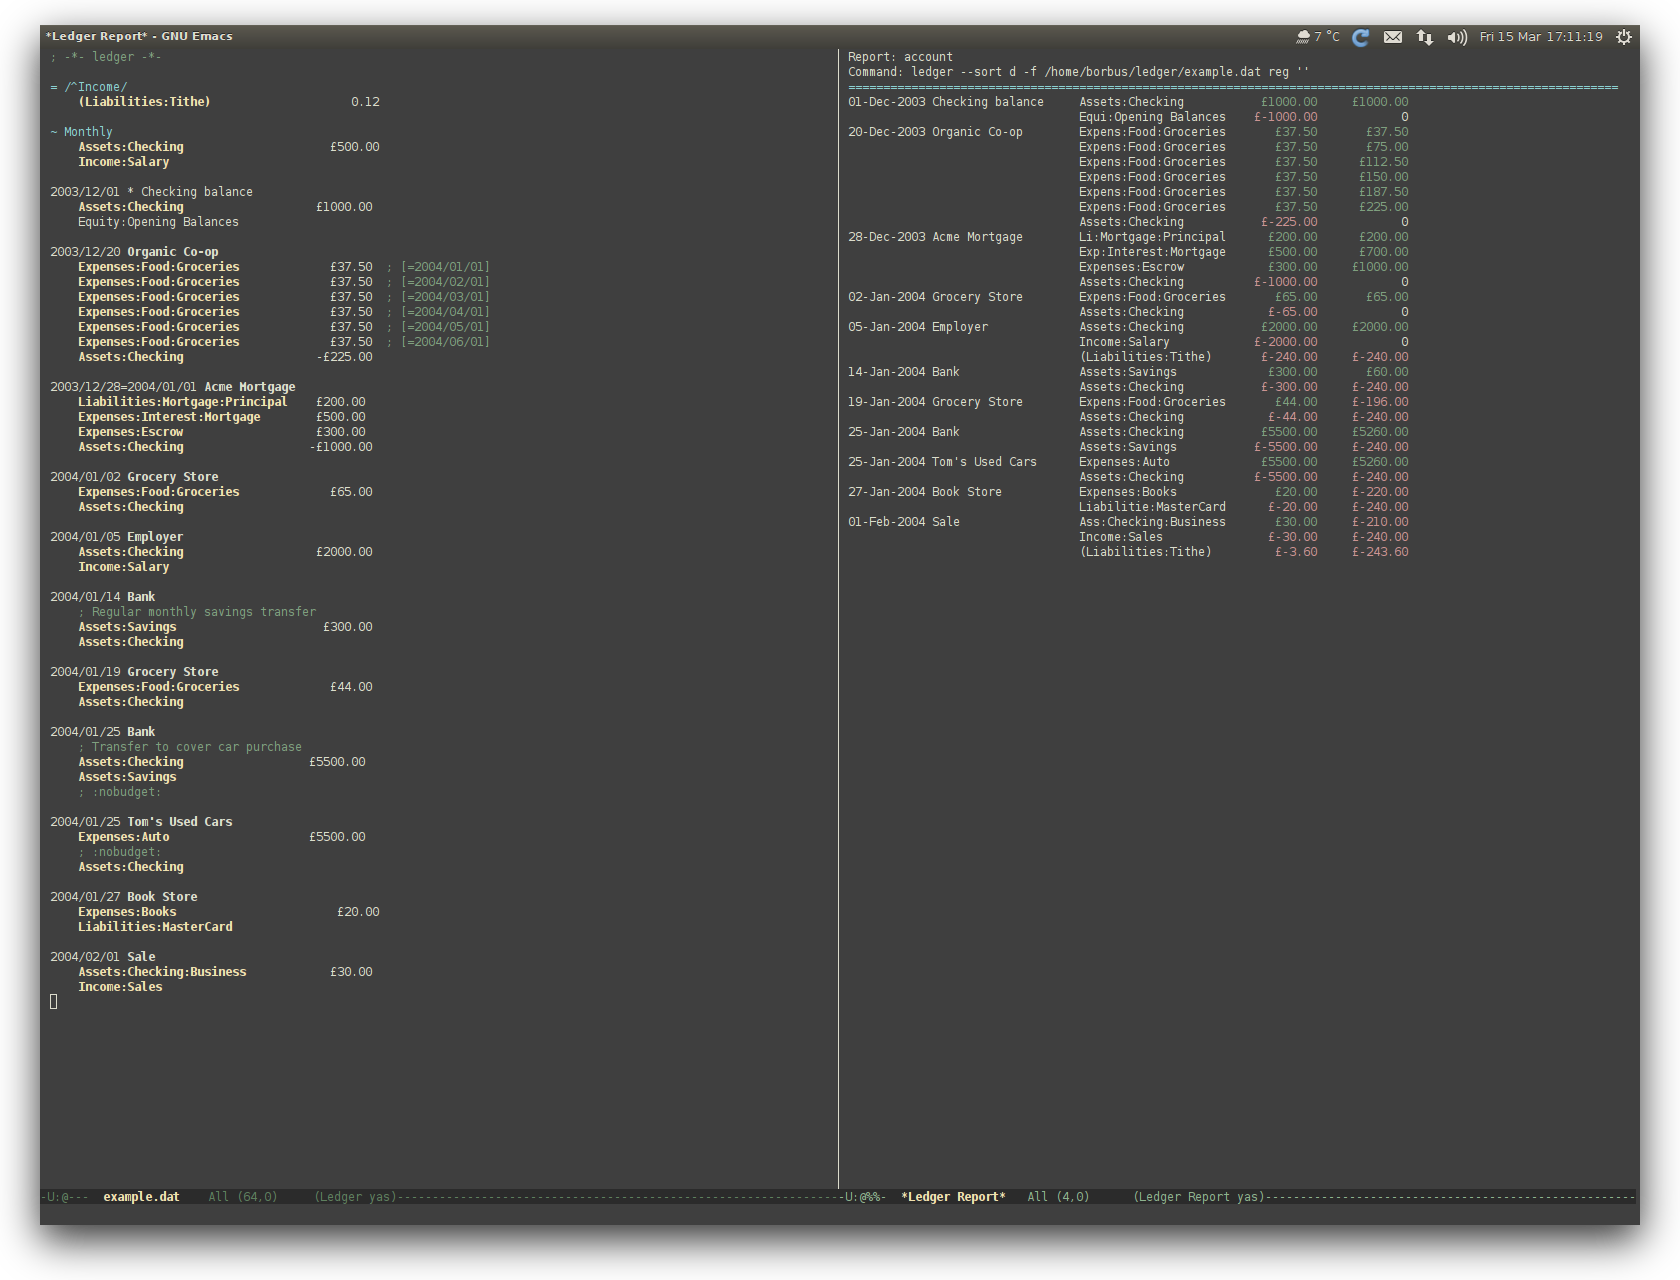 /TakeV/spacemacs/media/commit/71ae4520cc53d198cae2a96ac04b8599be755de4/contrib/finance/img/ledger.png